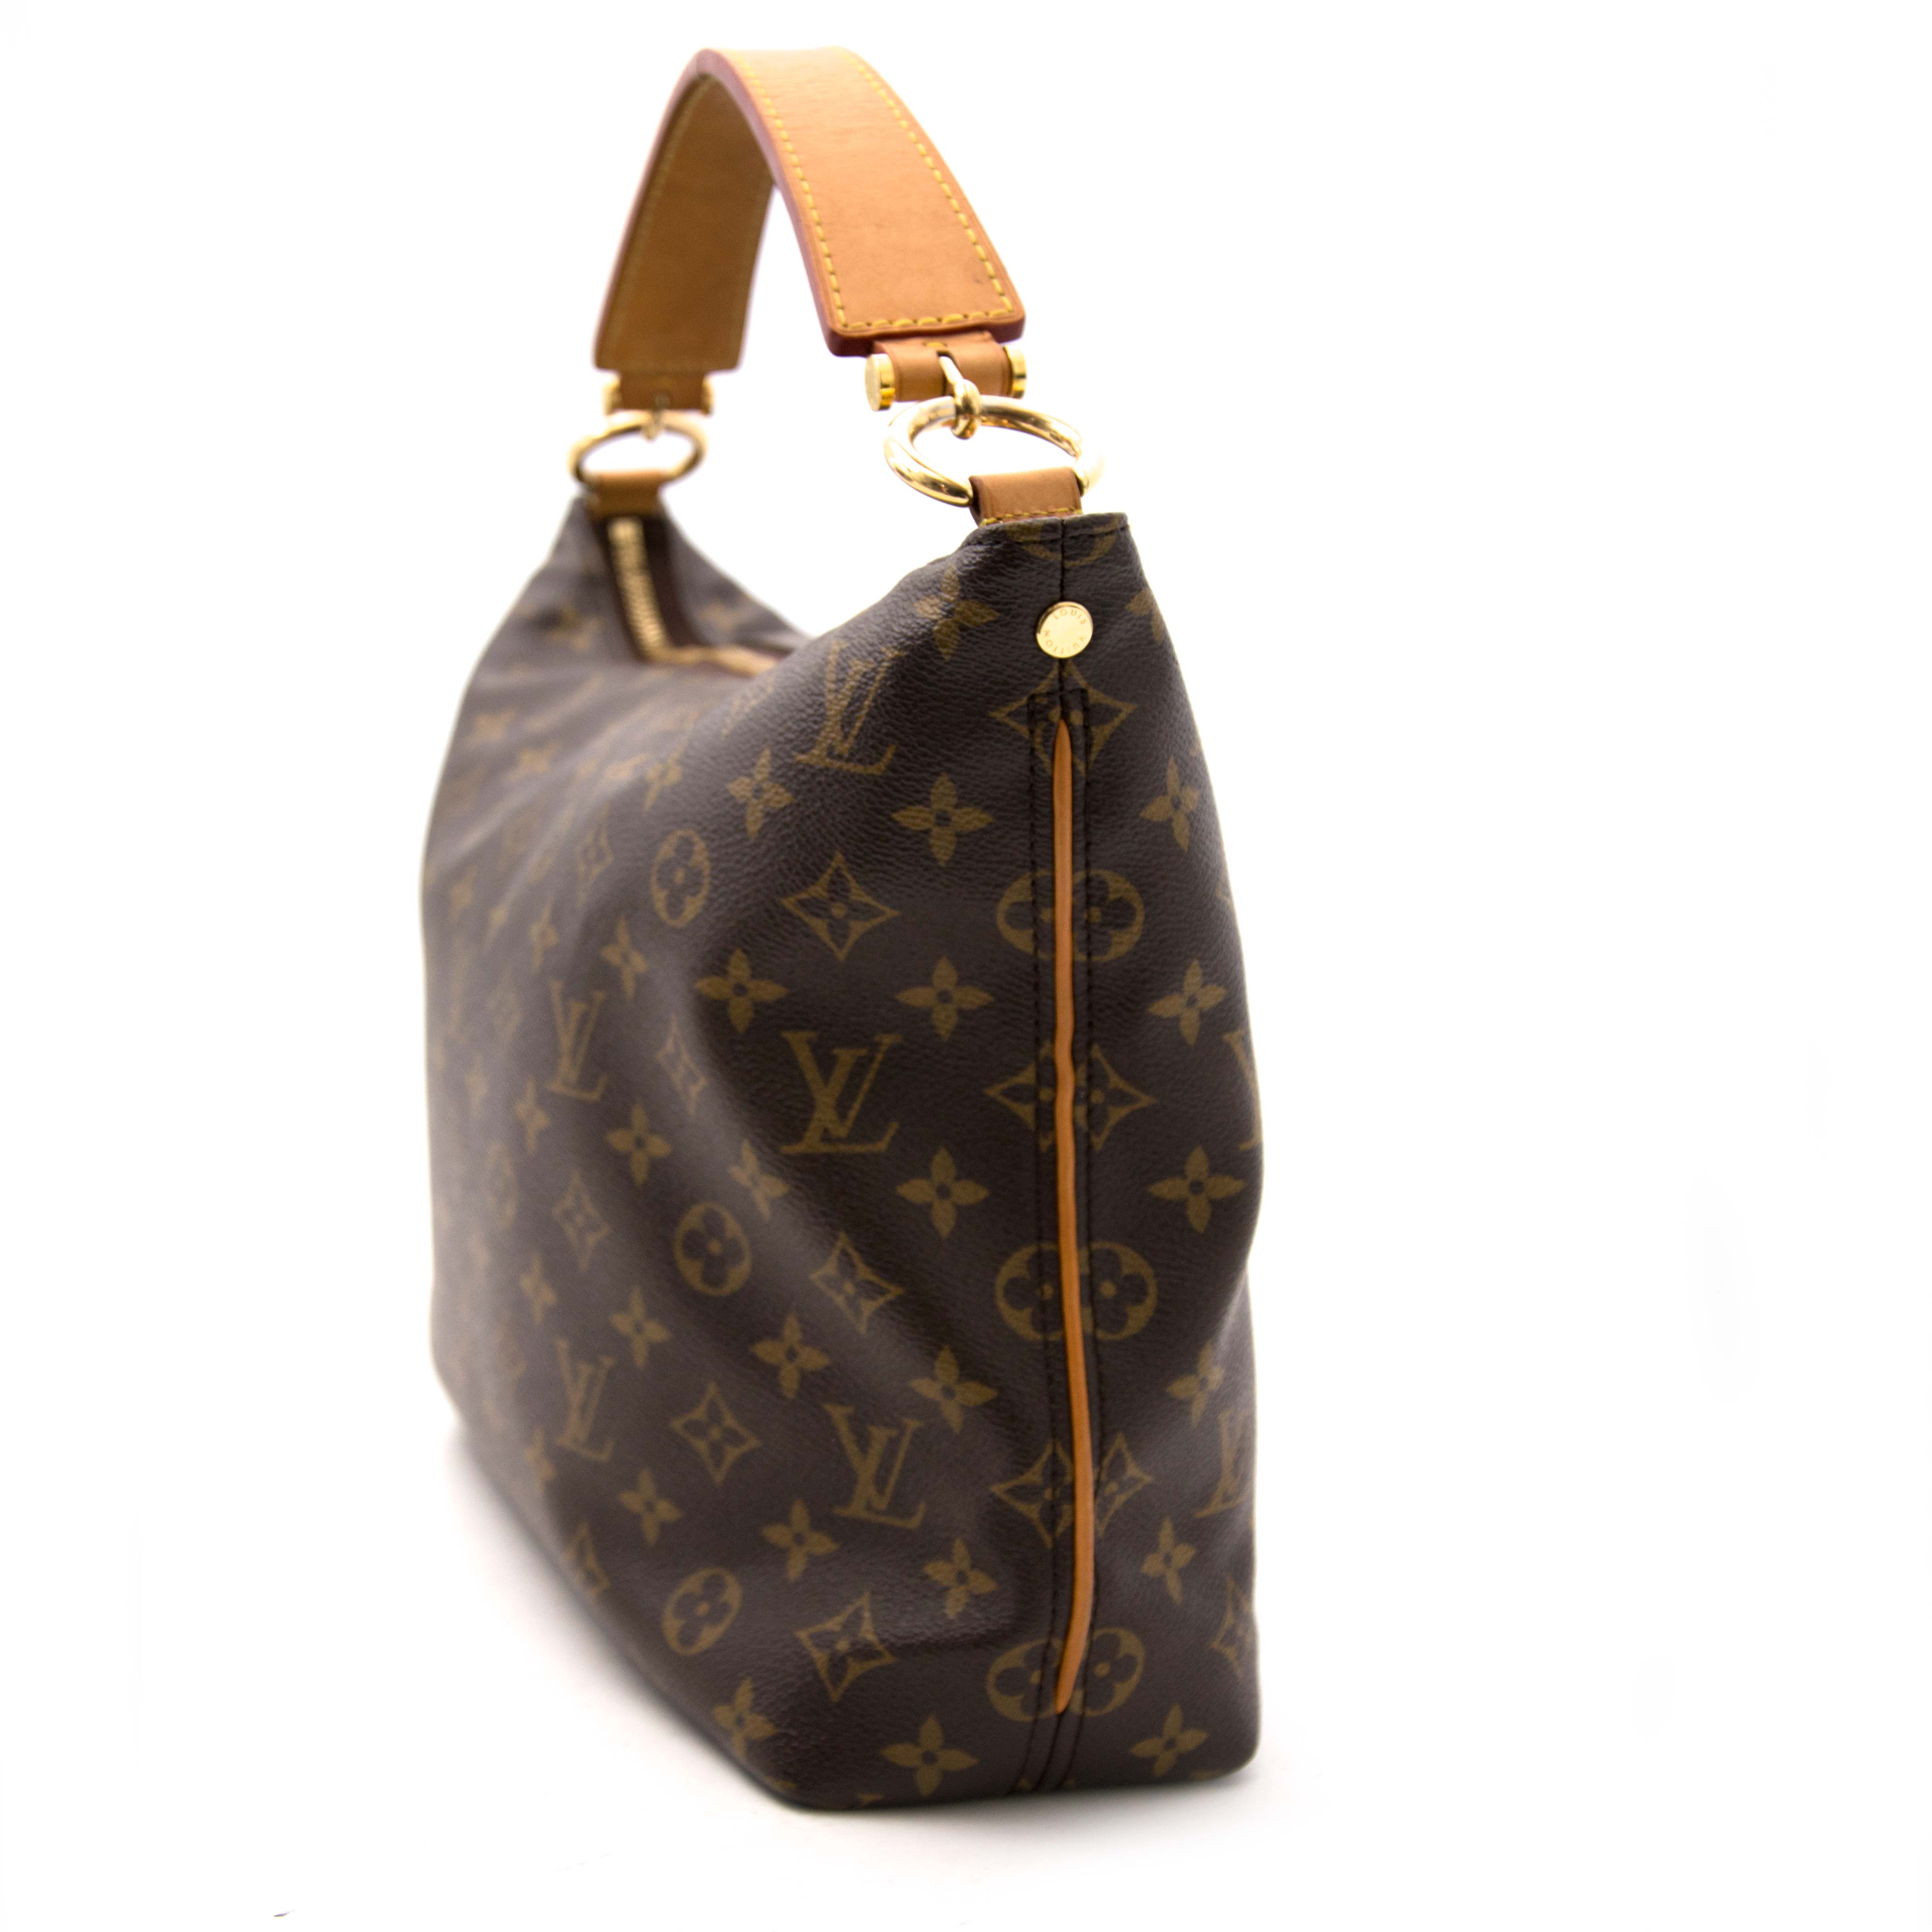 Louis Vuitton Sully PM Monogram for Sale in Baytown, TX - OfferUp